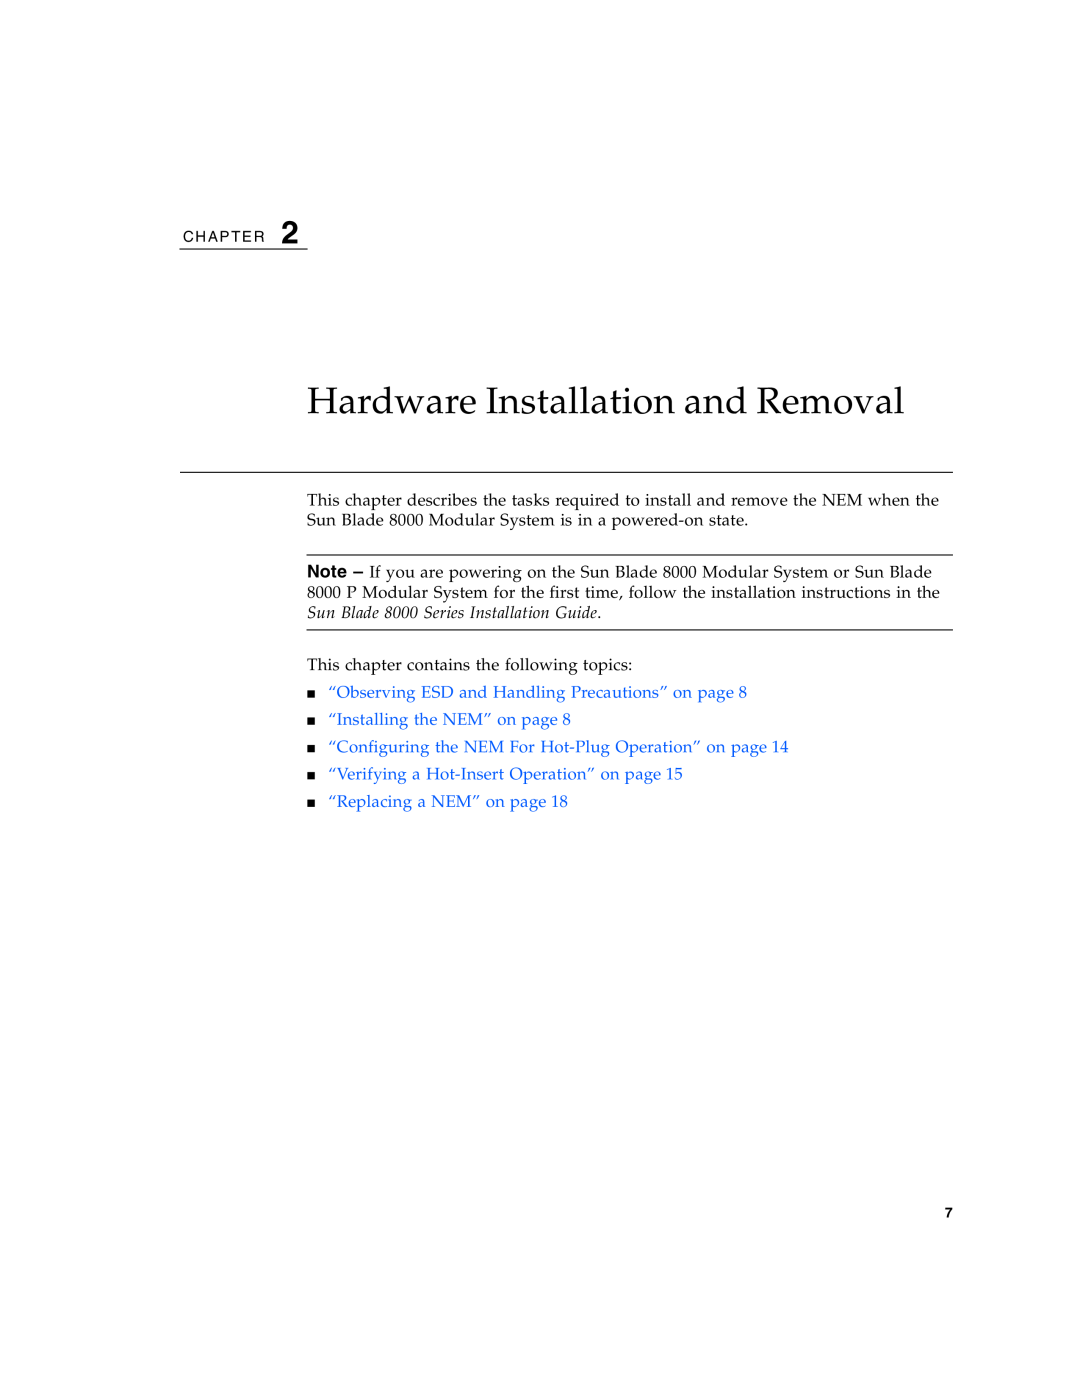 Sun Microsystems 2.0 manual Hardware Installation and Removal, “Observing ESD and Handling Precautions” on page 